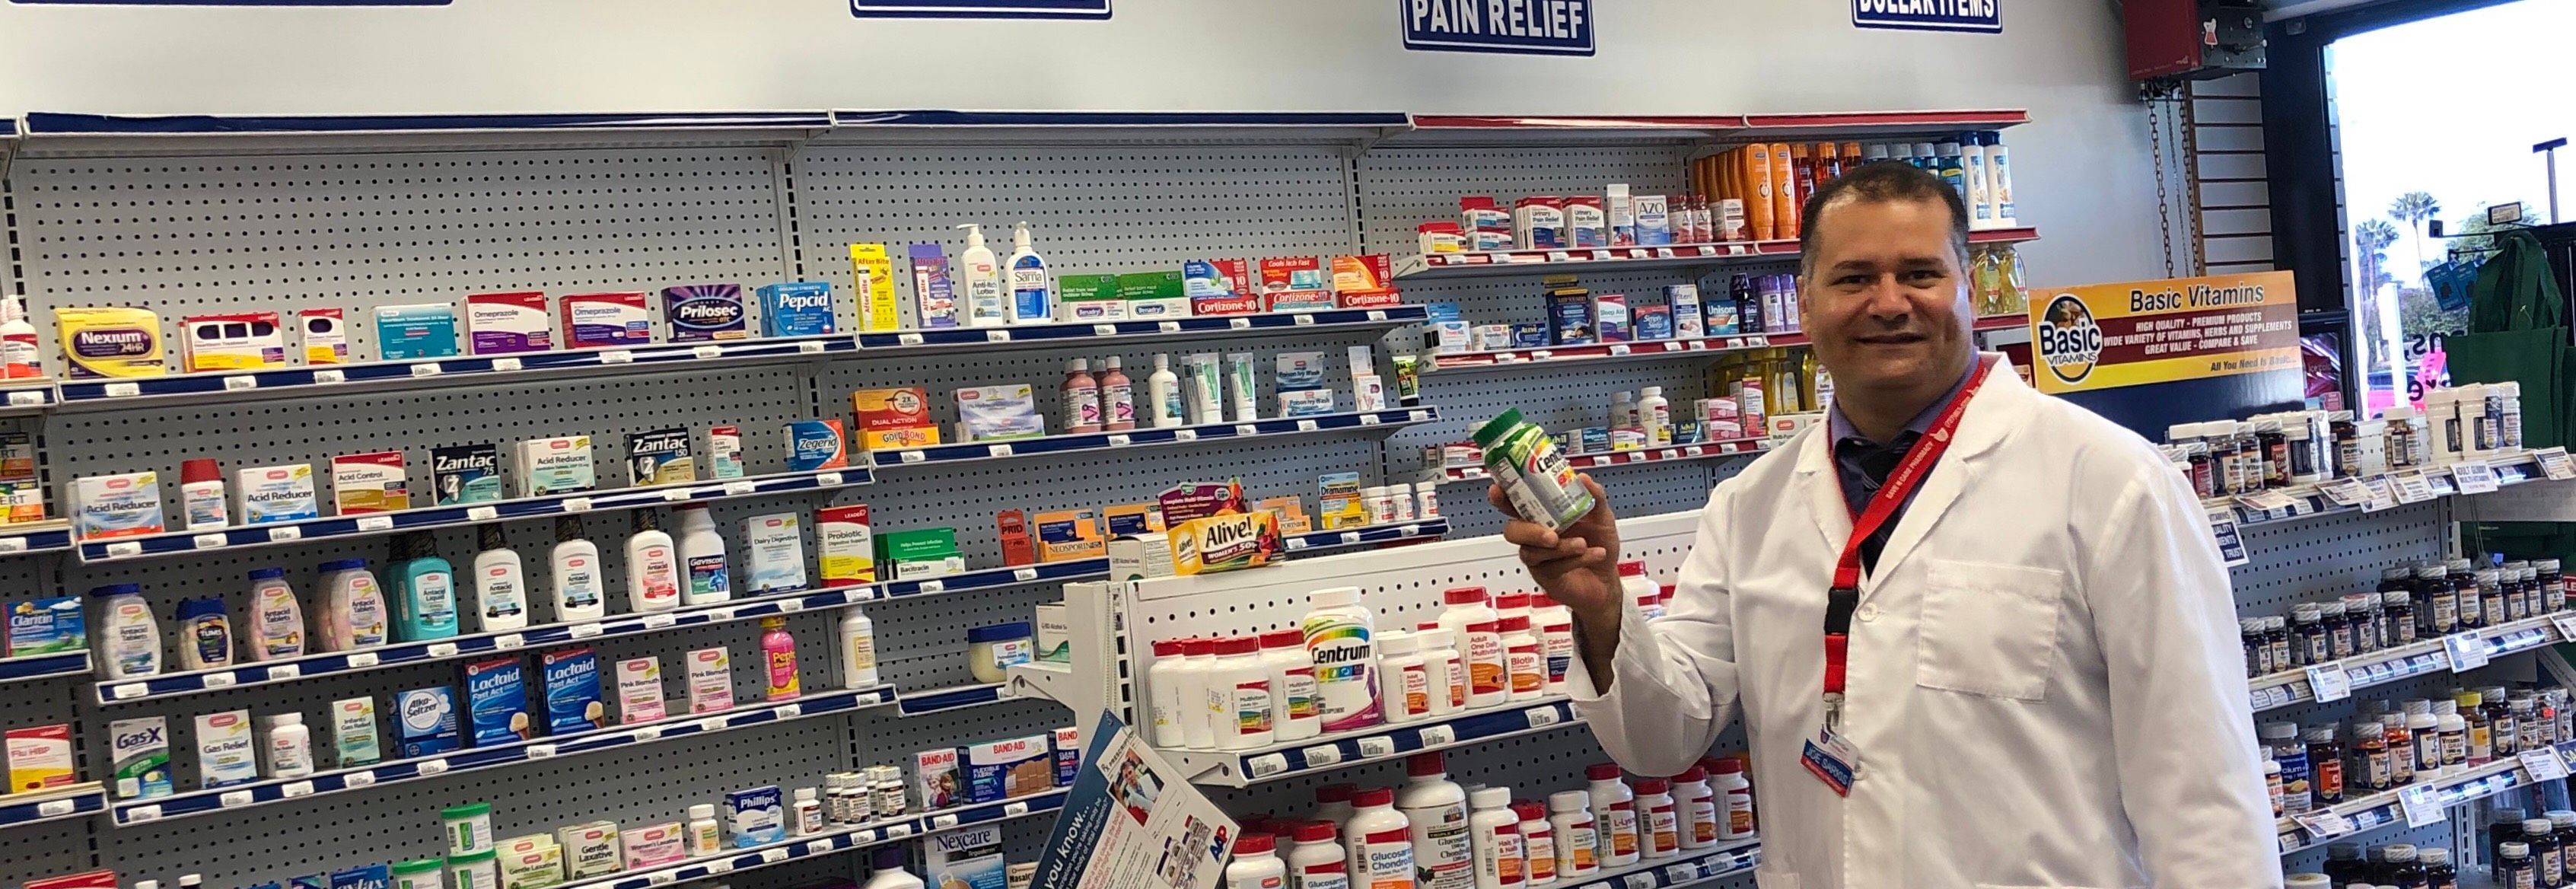 A Pharmacy With World-Class Service